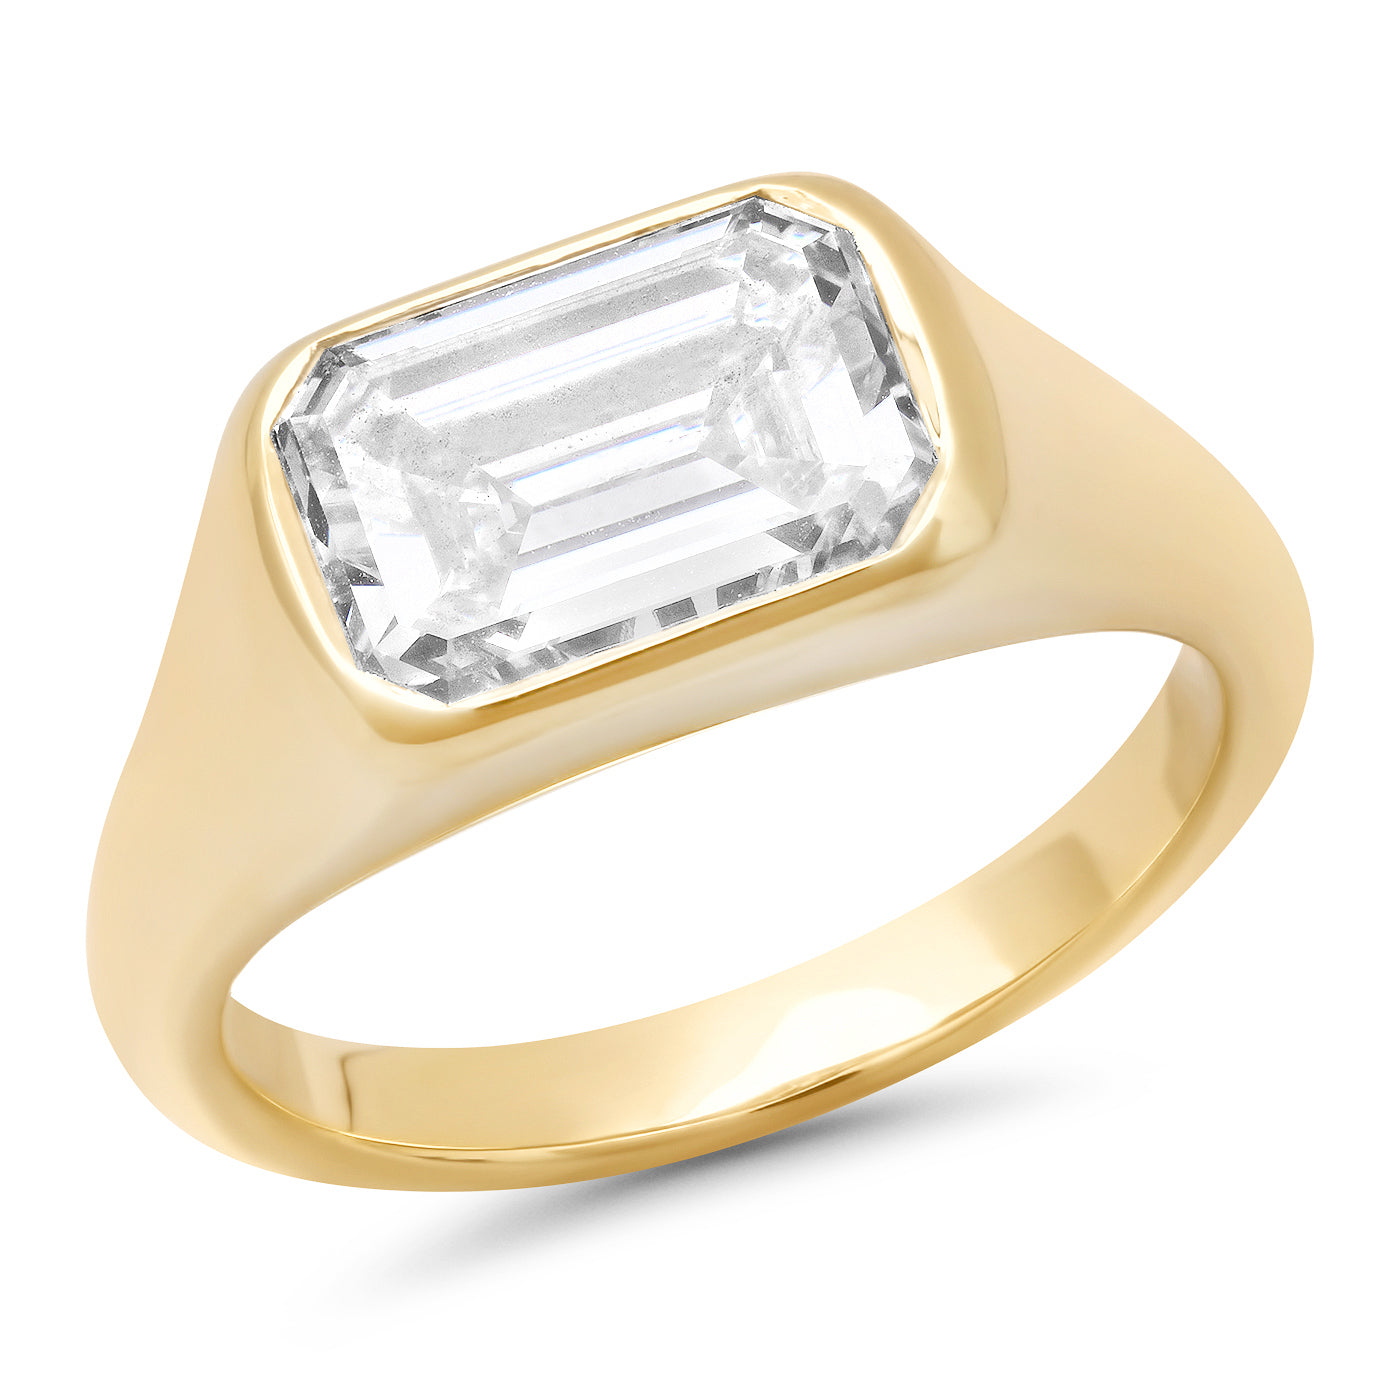 Sold - 2.01ct Emerald Cut Engagement Ring